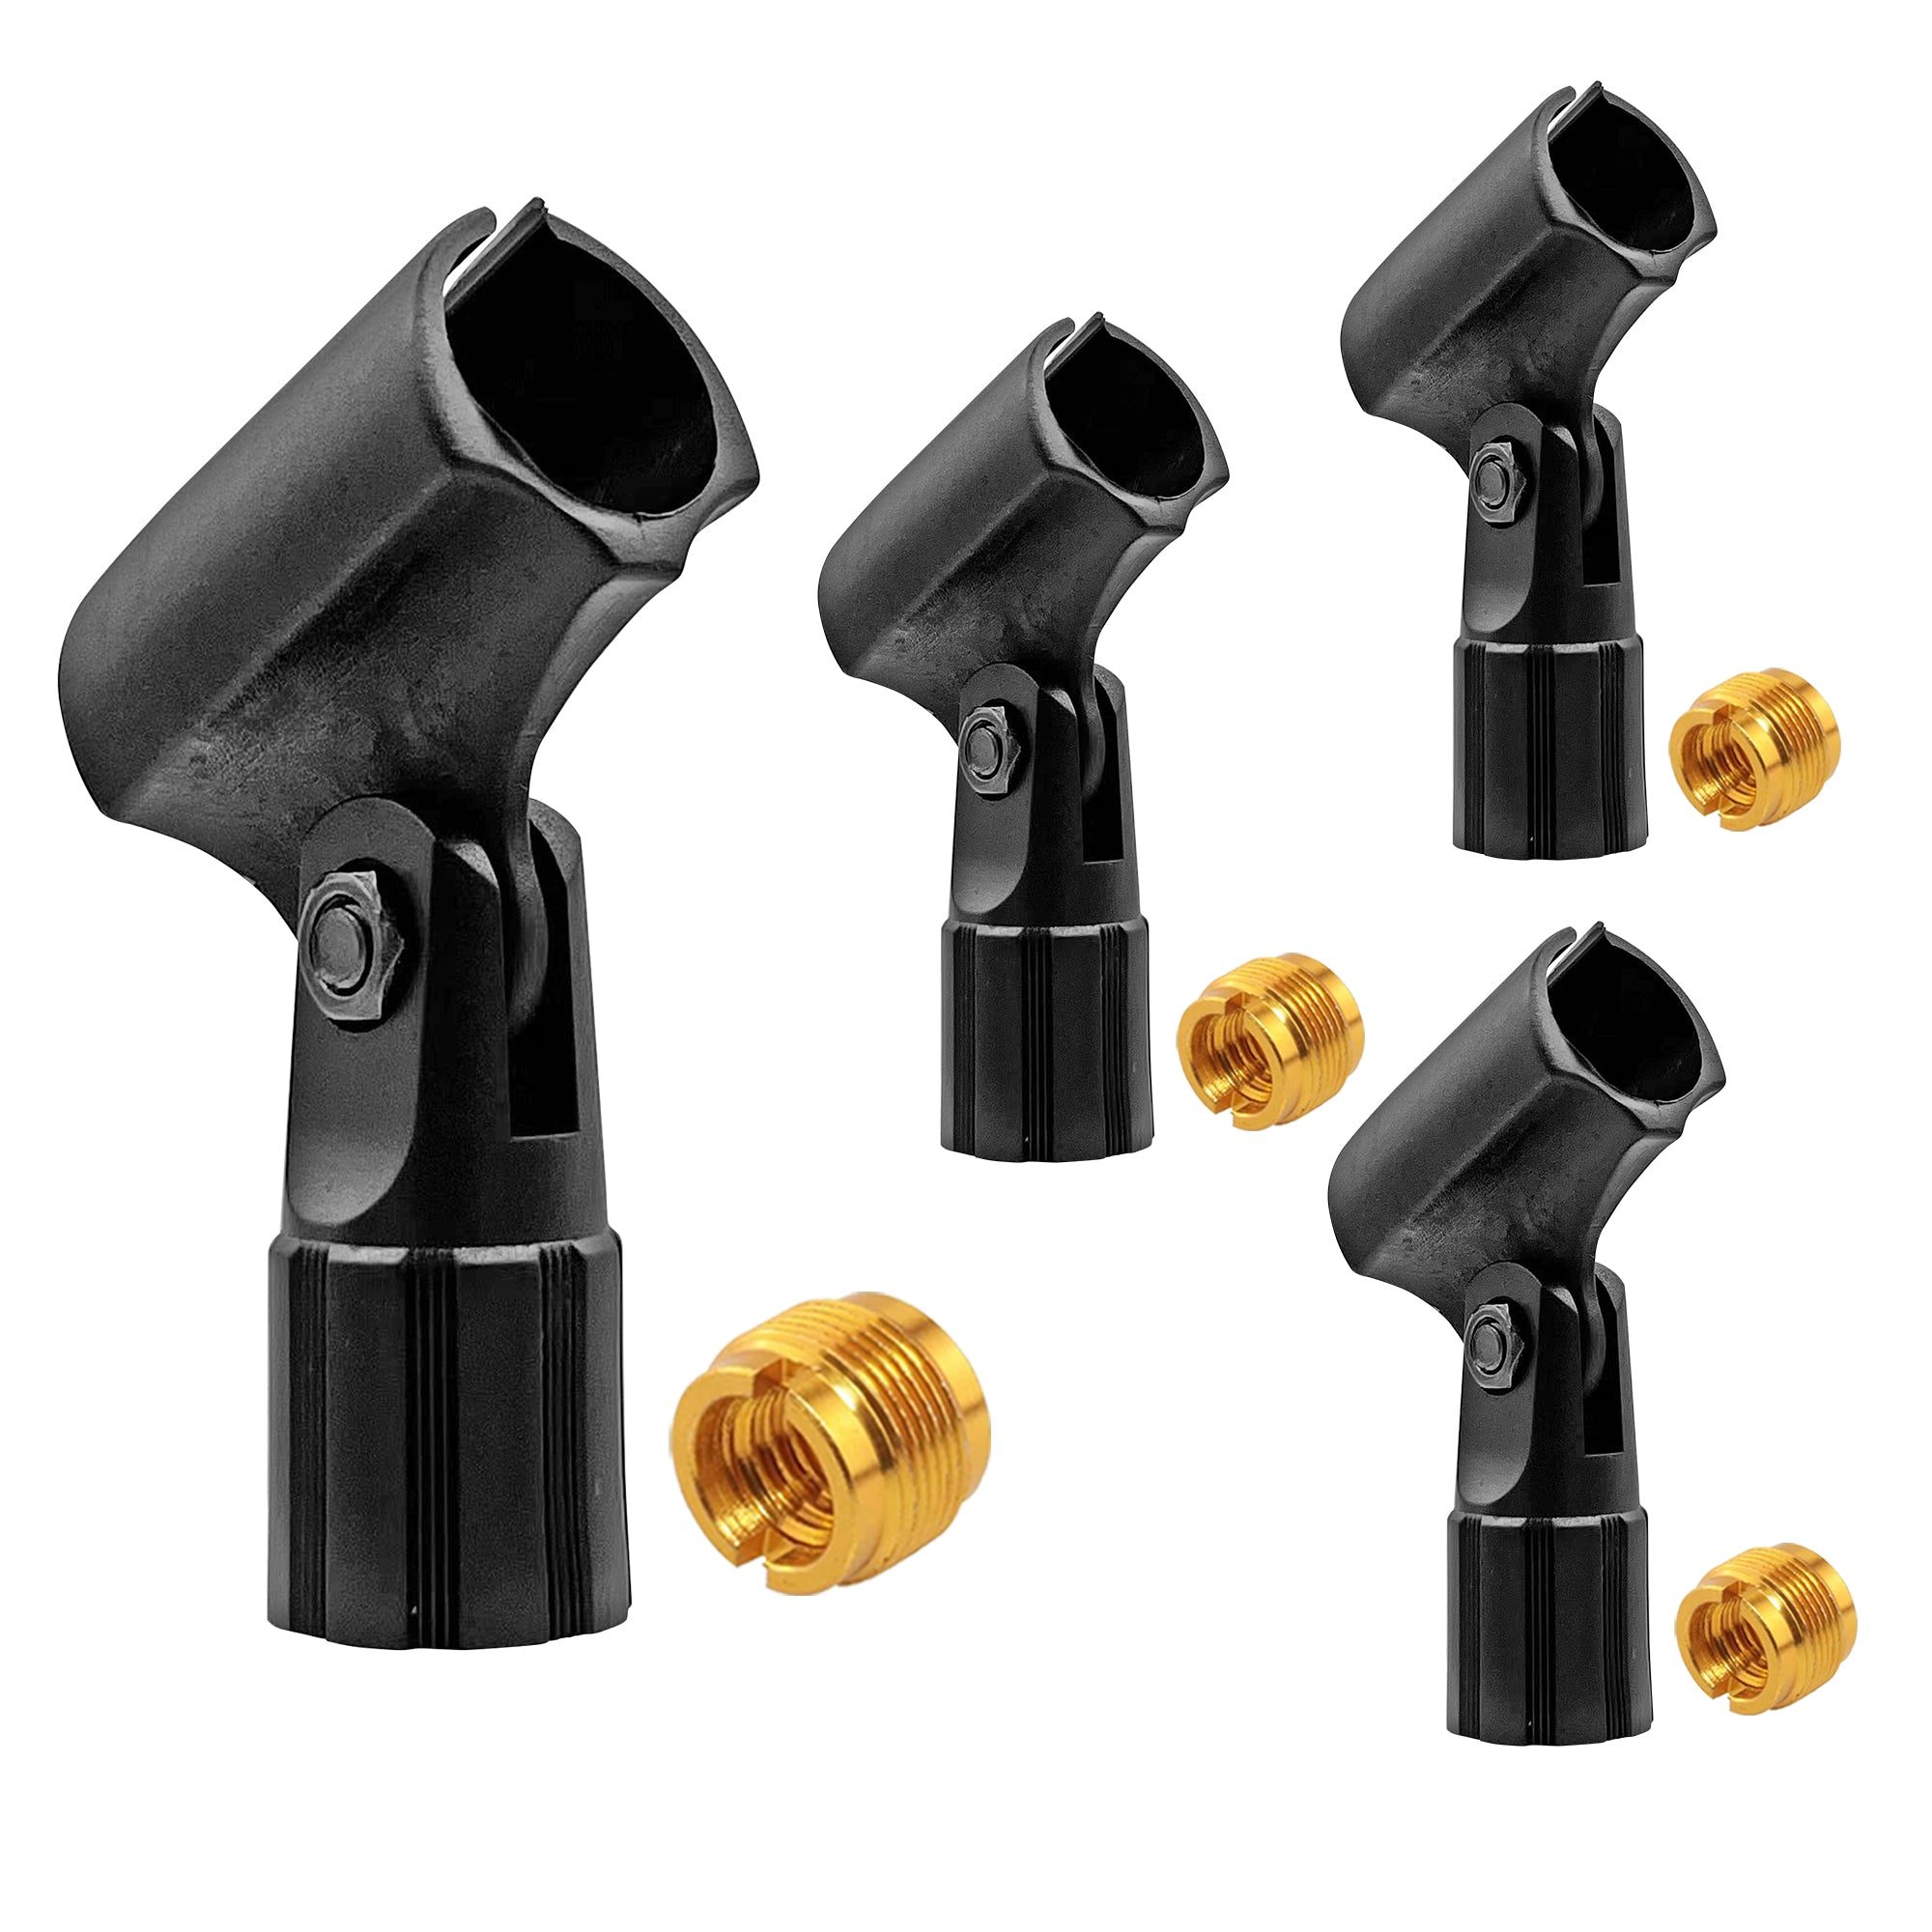 5 Core Universal Microphone Clip Holder 4Pack Mic Mount w Gold Plated 5/8" - 3/8" Screw Adapter